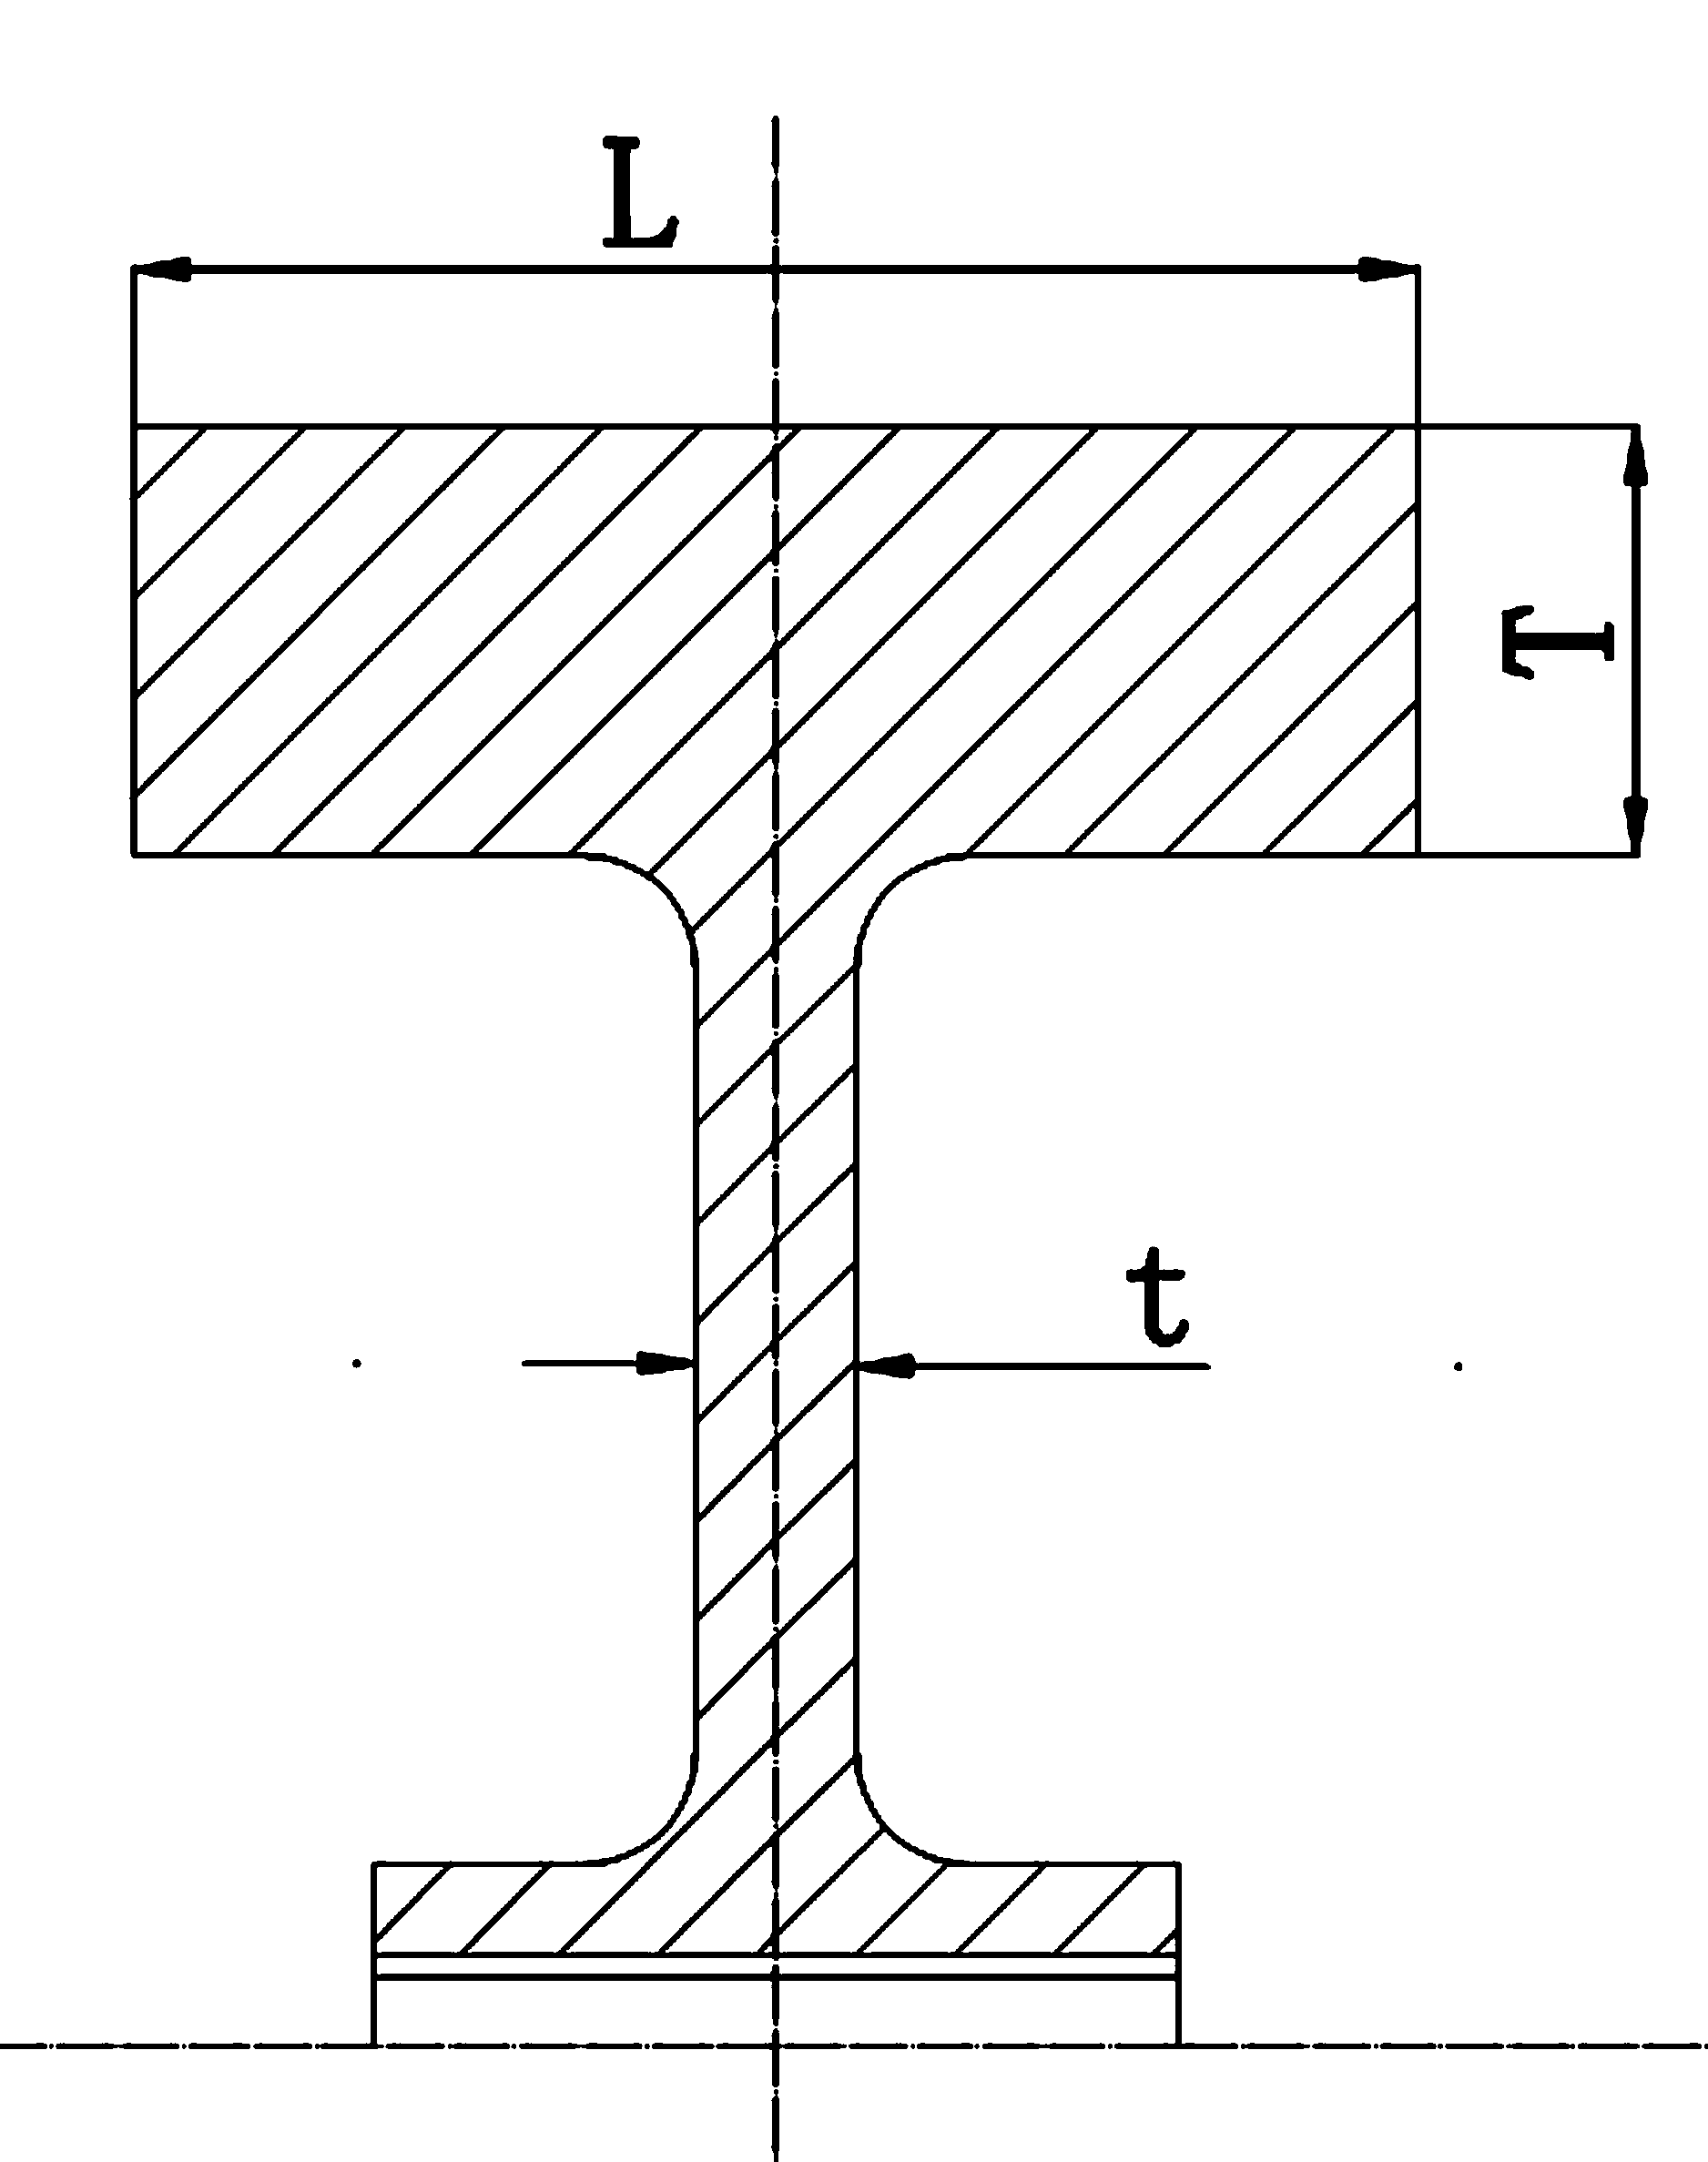 Horizontal shaft tide turbine power generation device storing energy by means of flywheel